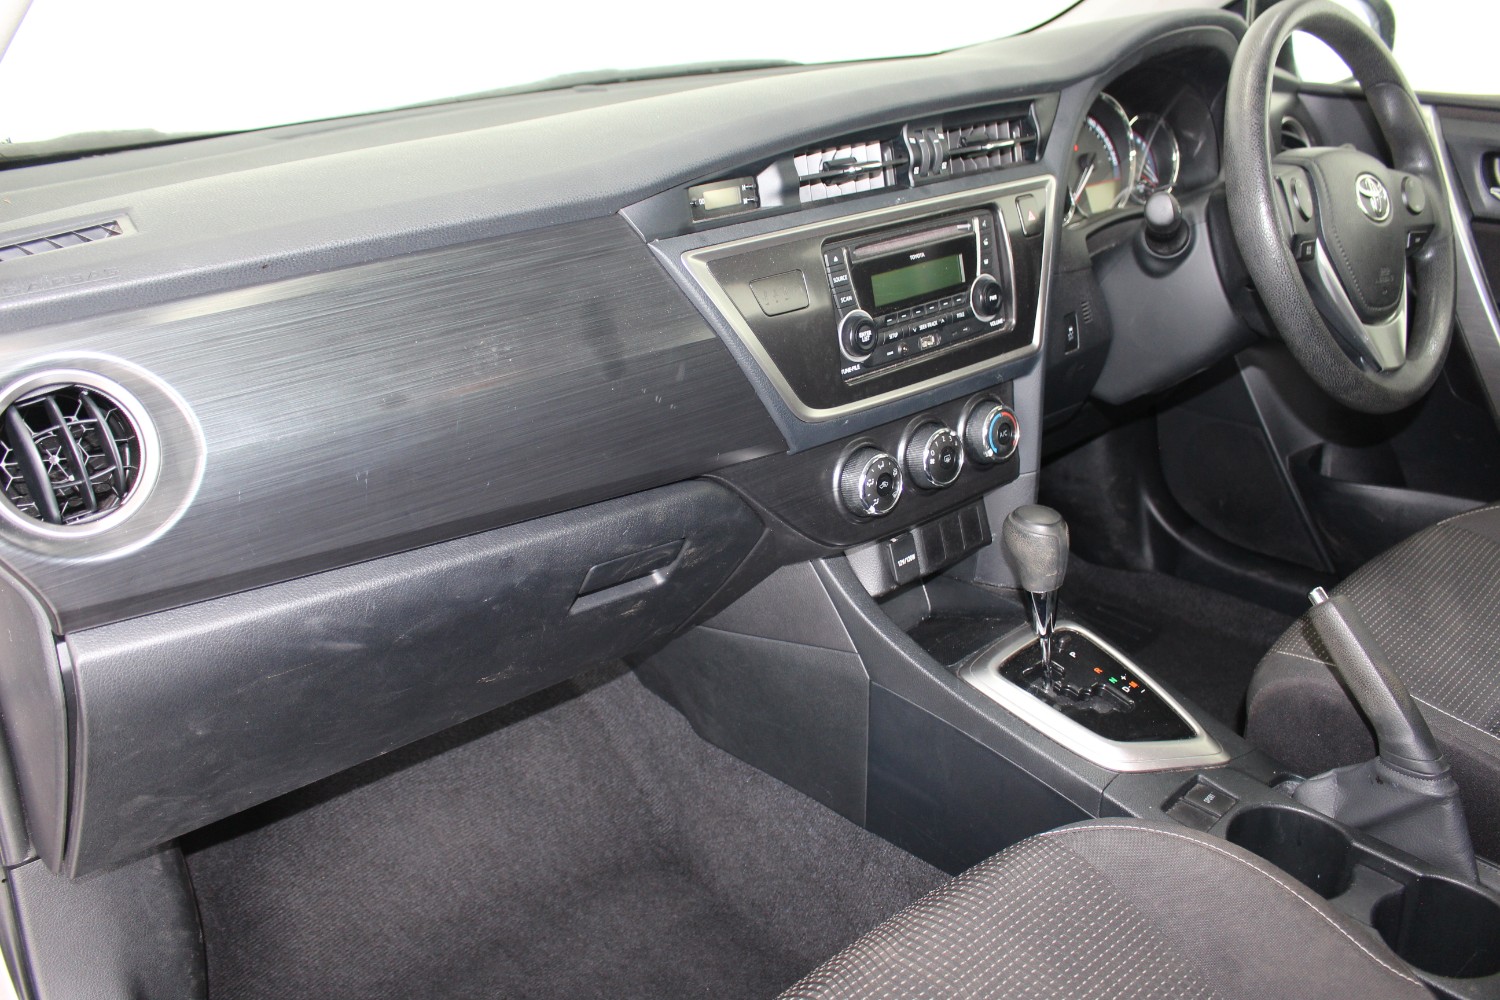 2015 Toyota Corolla ZRE182R ASCENT Hatch Image 12